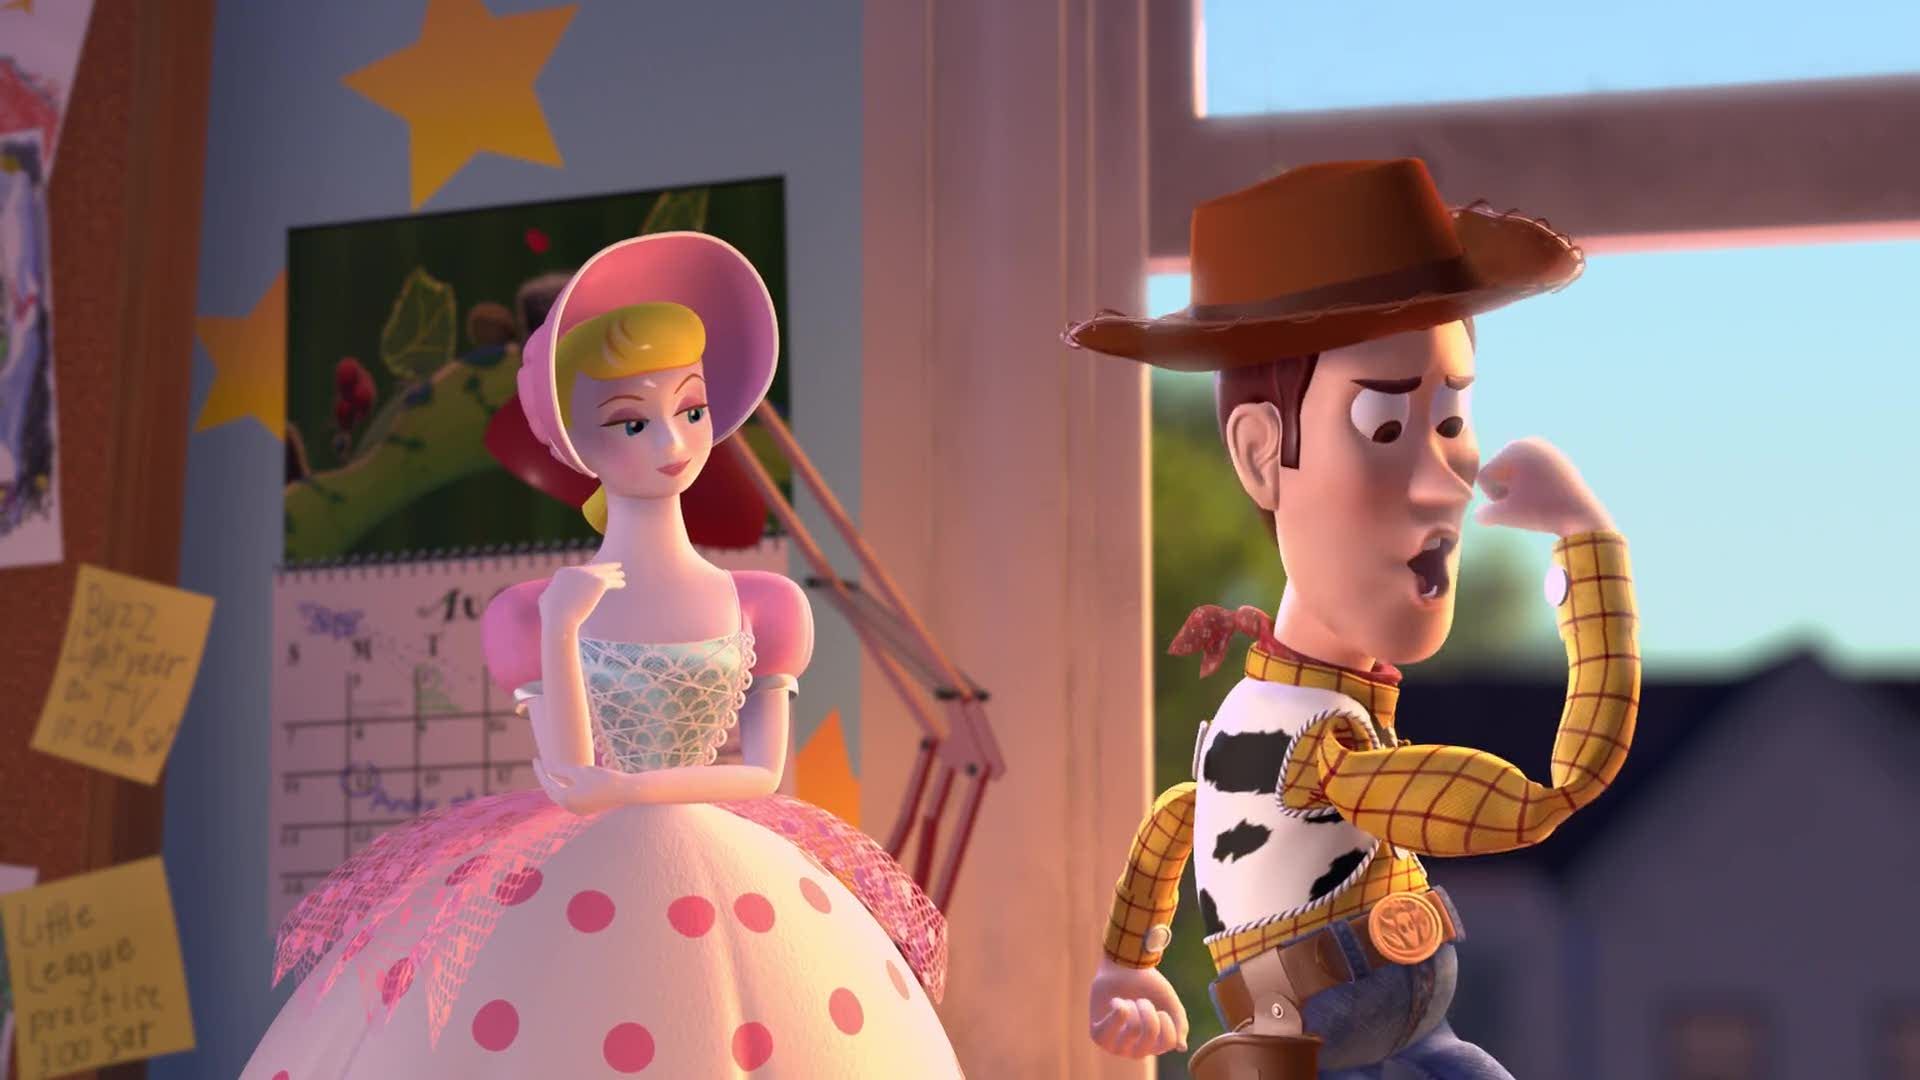 Toy Story 4 a Love Story Between Woody and Bo Peep | Collider1920 x 1080